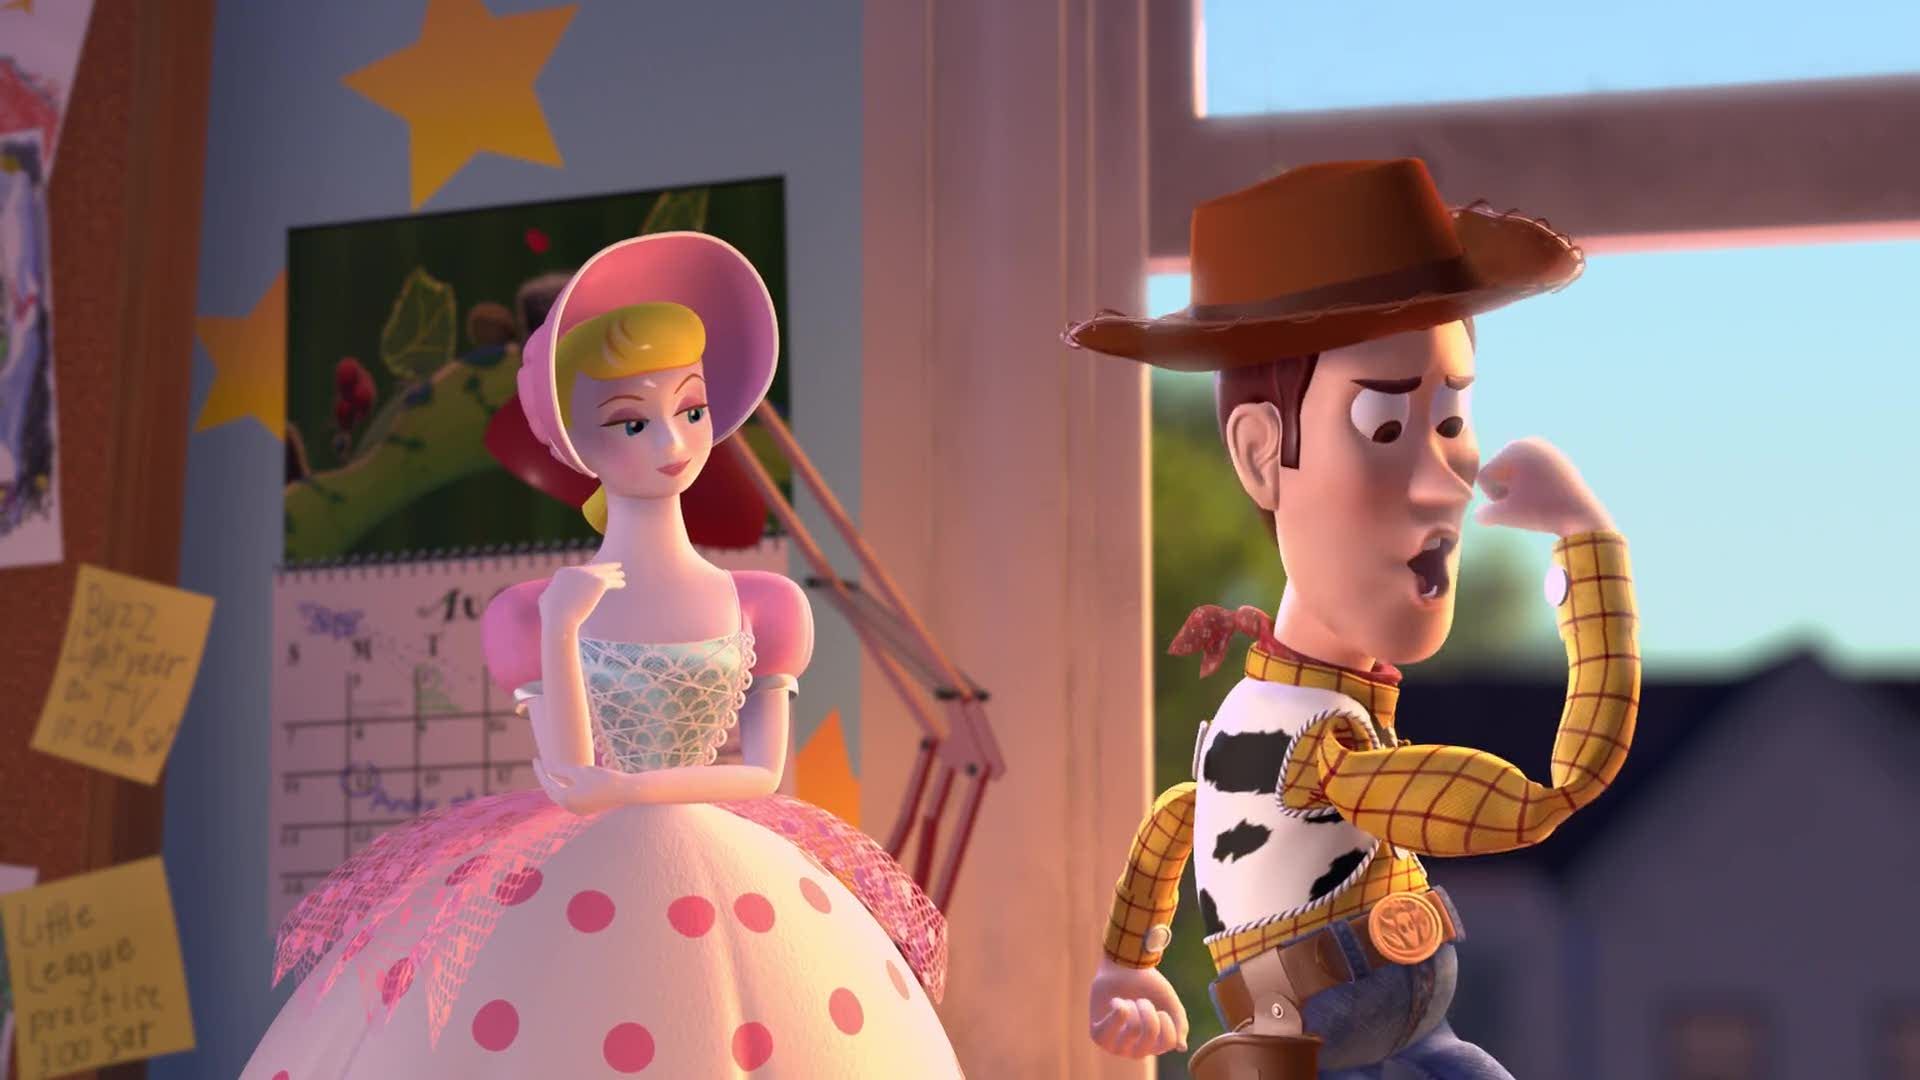 Toy Story 4 a Love Story Between Woody and Bo Peep | Collider1920 x 1080